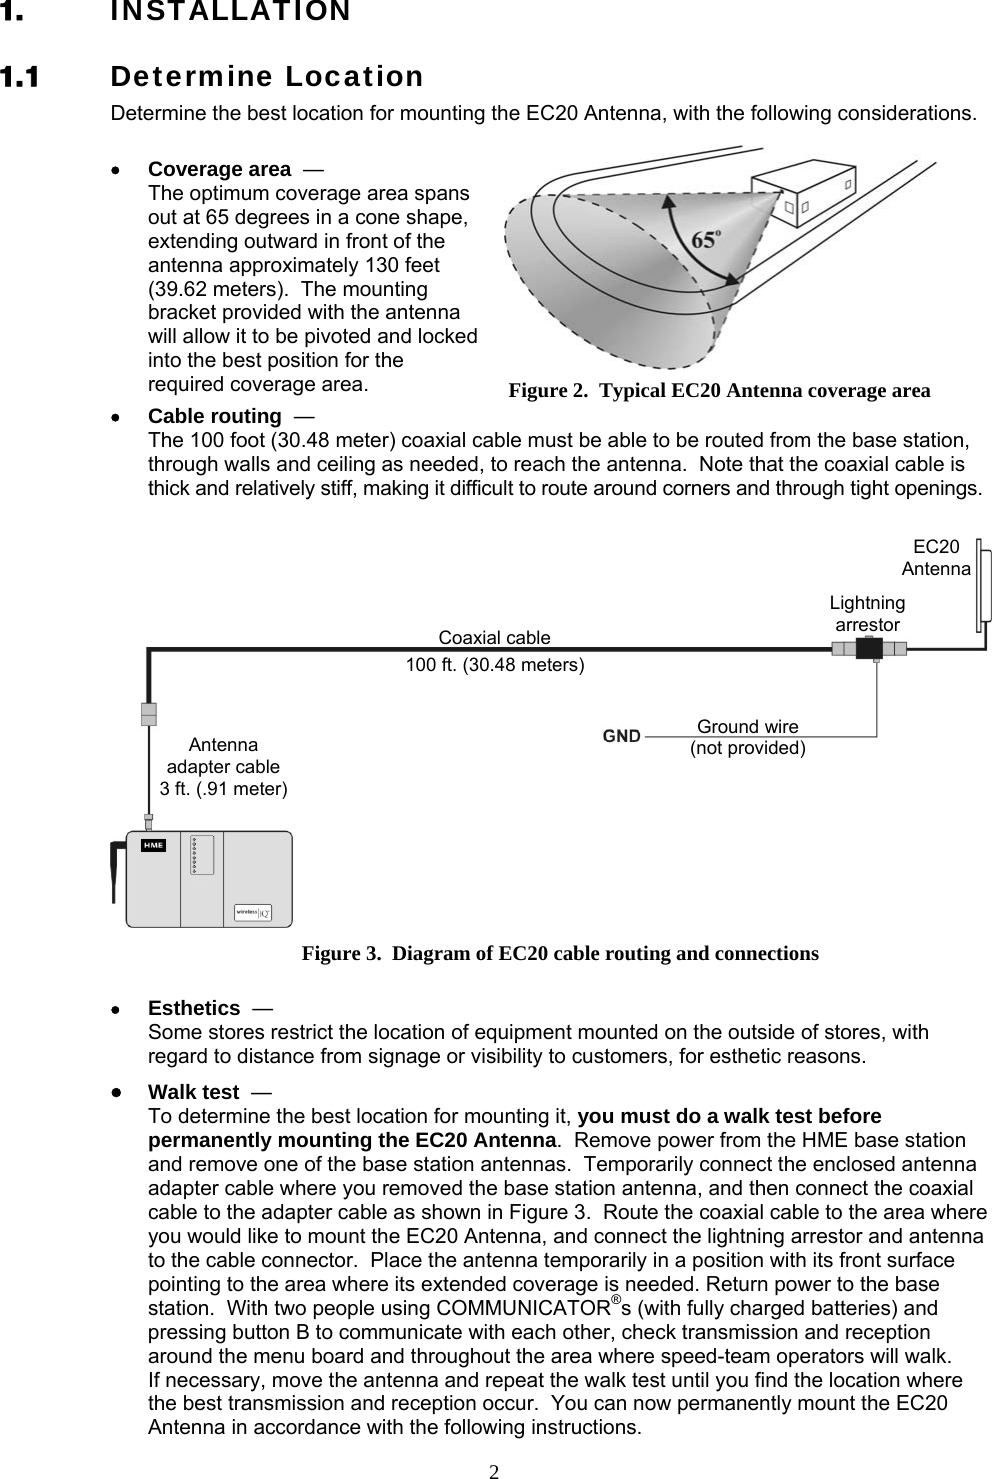  2Figure 2.  Typical EC20 Antenna coverage area 1. INSTALLATION 1.1 Determine Location Determine the best location for mounting the EC20 Antenna, with the following considerations.  • Coverage area  —   The optimum coverage area spans out at 65 degrees in a cone shape, extending outward in front of the antenna approximately 130 feet (39.62 meters).  The mounting bracket provided with the antenna will allow it to be pivoted and locked into the best position for the required coverage area. • Cable routing  —   The 100 foot (30.48 meter) coaxial cable must be able to be routed from the base station, through walls and ceiling as needed, to reach the antenna.  Note that the coaxial cable is thick and relatively stiff, making it difficult to route around corners and through tight openings.  • Esthetics  —   Some stores restrict the location of equipment mounted on the outside of stores, with regard to distance from signage or visibility to customers, for esthetic reasons. • Walk test  —   To determine the best location for mounting it, you must do a walk test before permanently mounting the EC20 Antenna.  Remove power from the HME base station and remove one of the base station antennas.  Temporarily connect the enclosed antenna adapter cable where you removed the base station antenna, and then connect the coaxial cable to the adapter cable as shown in Figure 3.  Route the coaxial cable to the area where you would like to mount the EC20 Antenna, and connect the lightning arrestor and antenna to the cable connector.  Place the antenna temporarily in a position with its front surface pointing to the area where its extended coverage is needed. Return power to the base station.  With two people using COMMUNICATOR®s (with fully charged batteries) and pressing button B to communicate with each other, check transmission and reception around the menu board and throughout the area where speed-team operators will walk.   If necessary, move the antenna and repeat the walk test until you find the location where the best transmission and reception occur.  You can now permanently mount the EC20 Antenna in accordance with the following instructions. HME base stationFigure 3.  Diagram of EC20 cable routing and connections Ground wire (not provided) Coaxial cable 100 ft. (30.48 meters)Antenna adapter cable 3 ft. (.91 meter) Lightningarrestor EC20Antenna